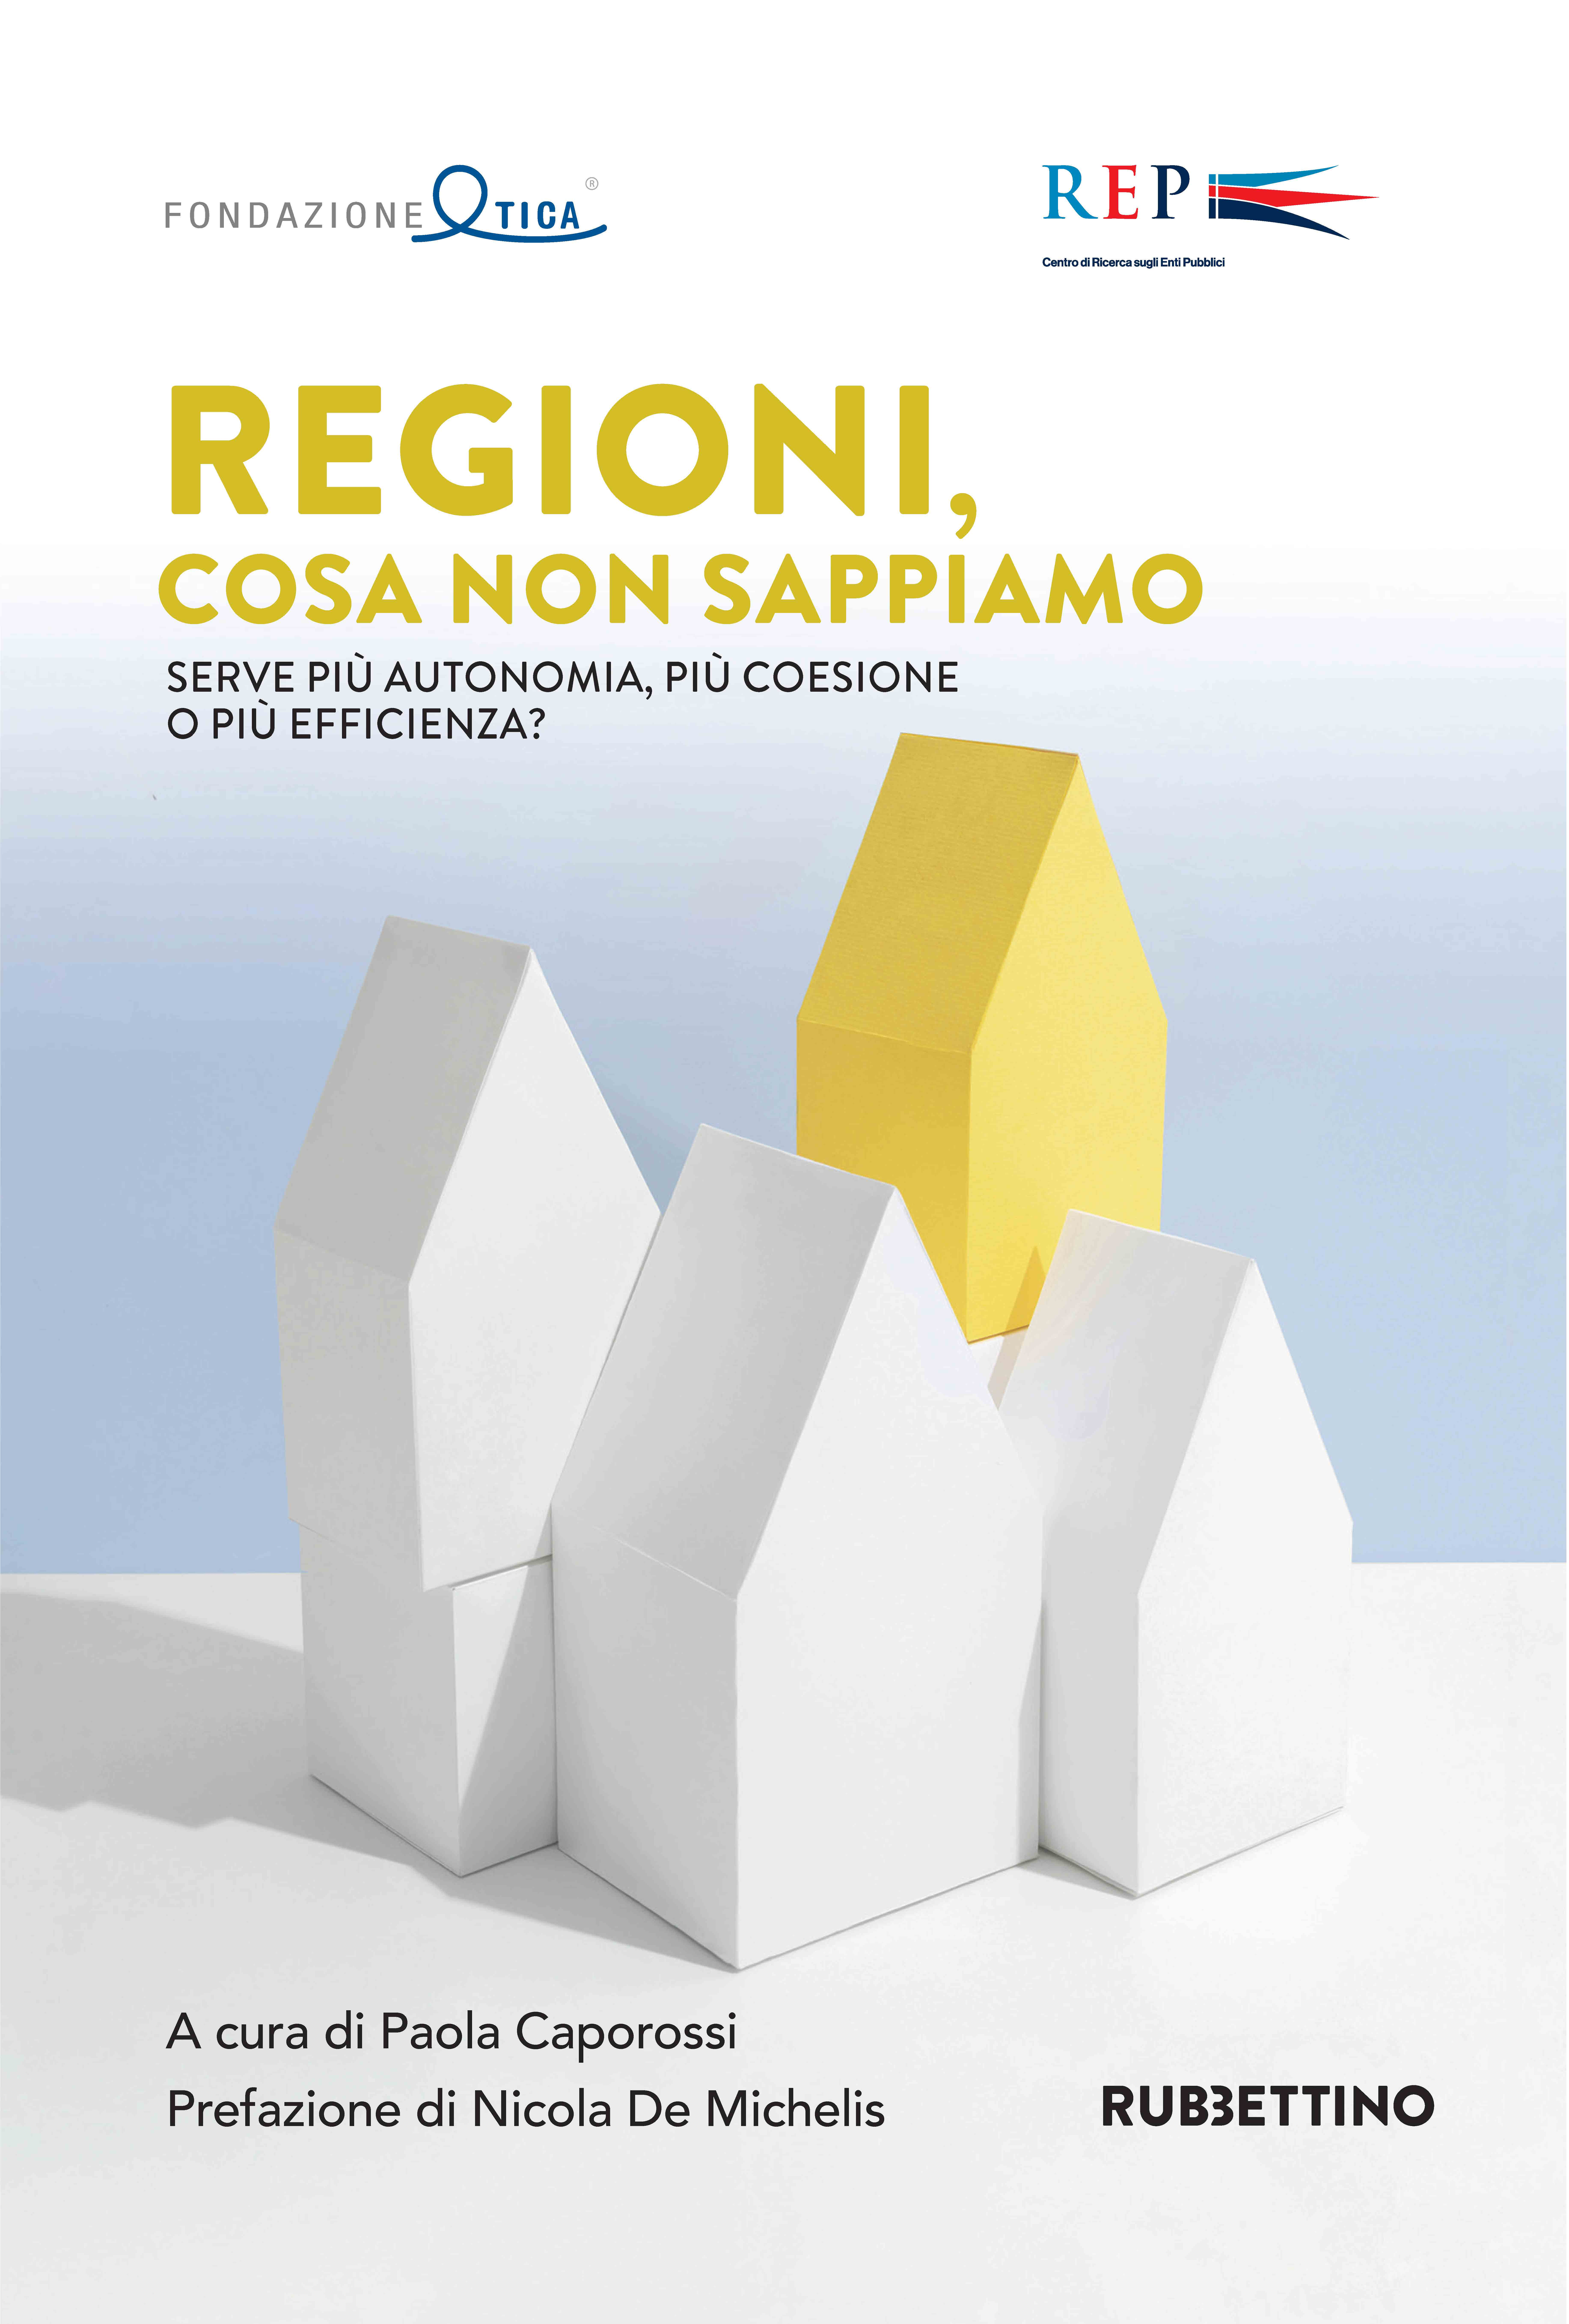 The New Report on Regions is available